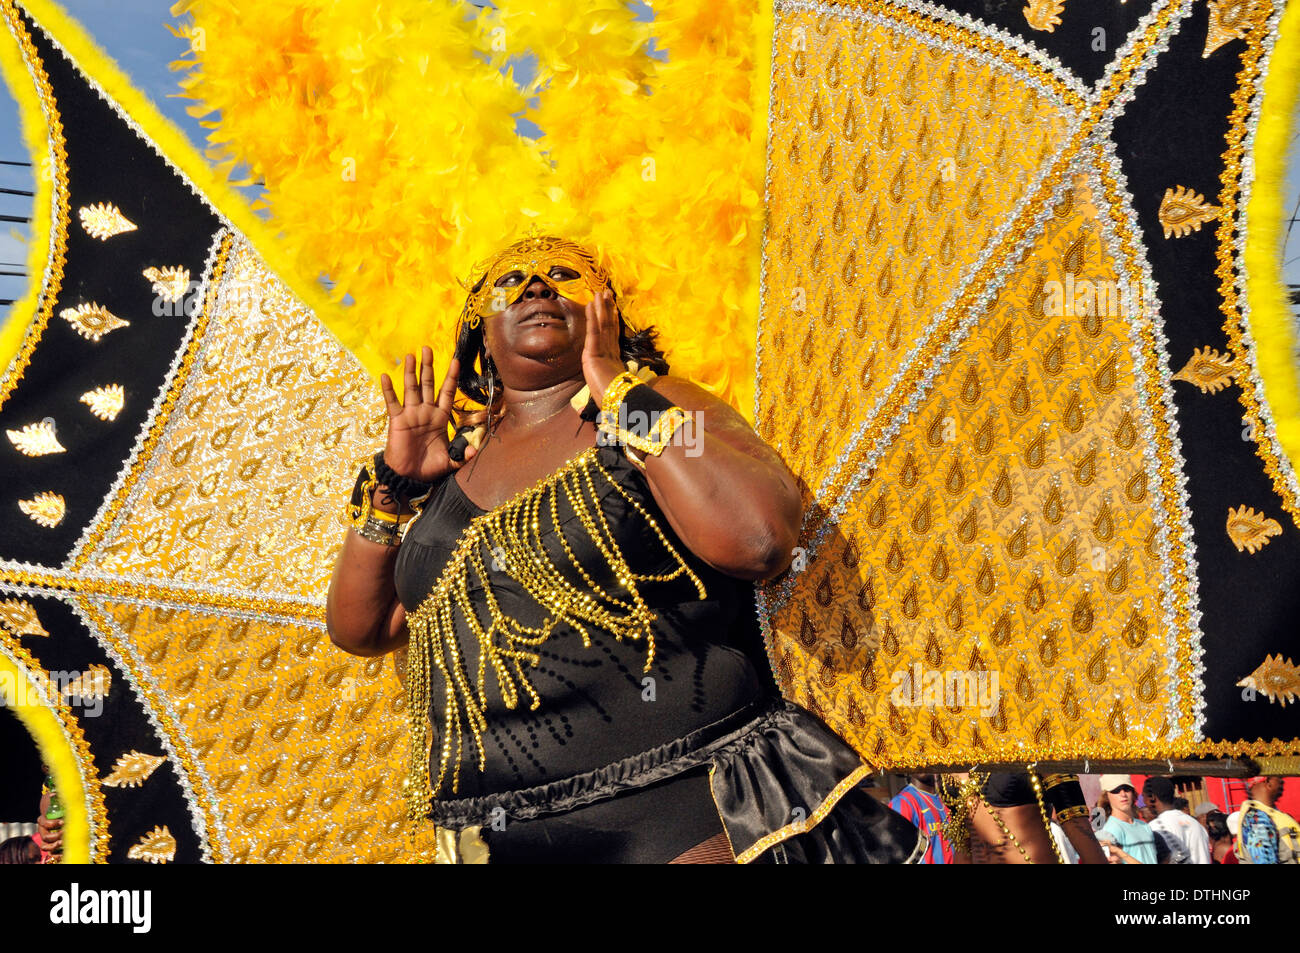 Masquerader at carnival celebration in the streets of Scarborough,Tobago. Stock Photo